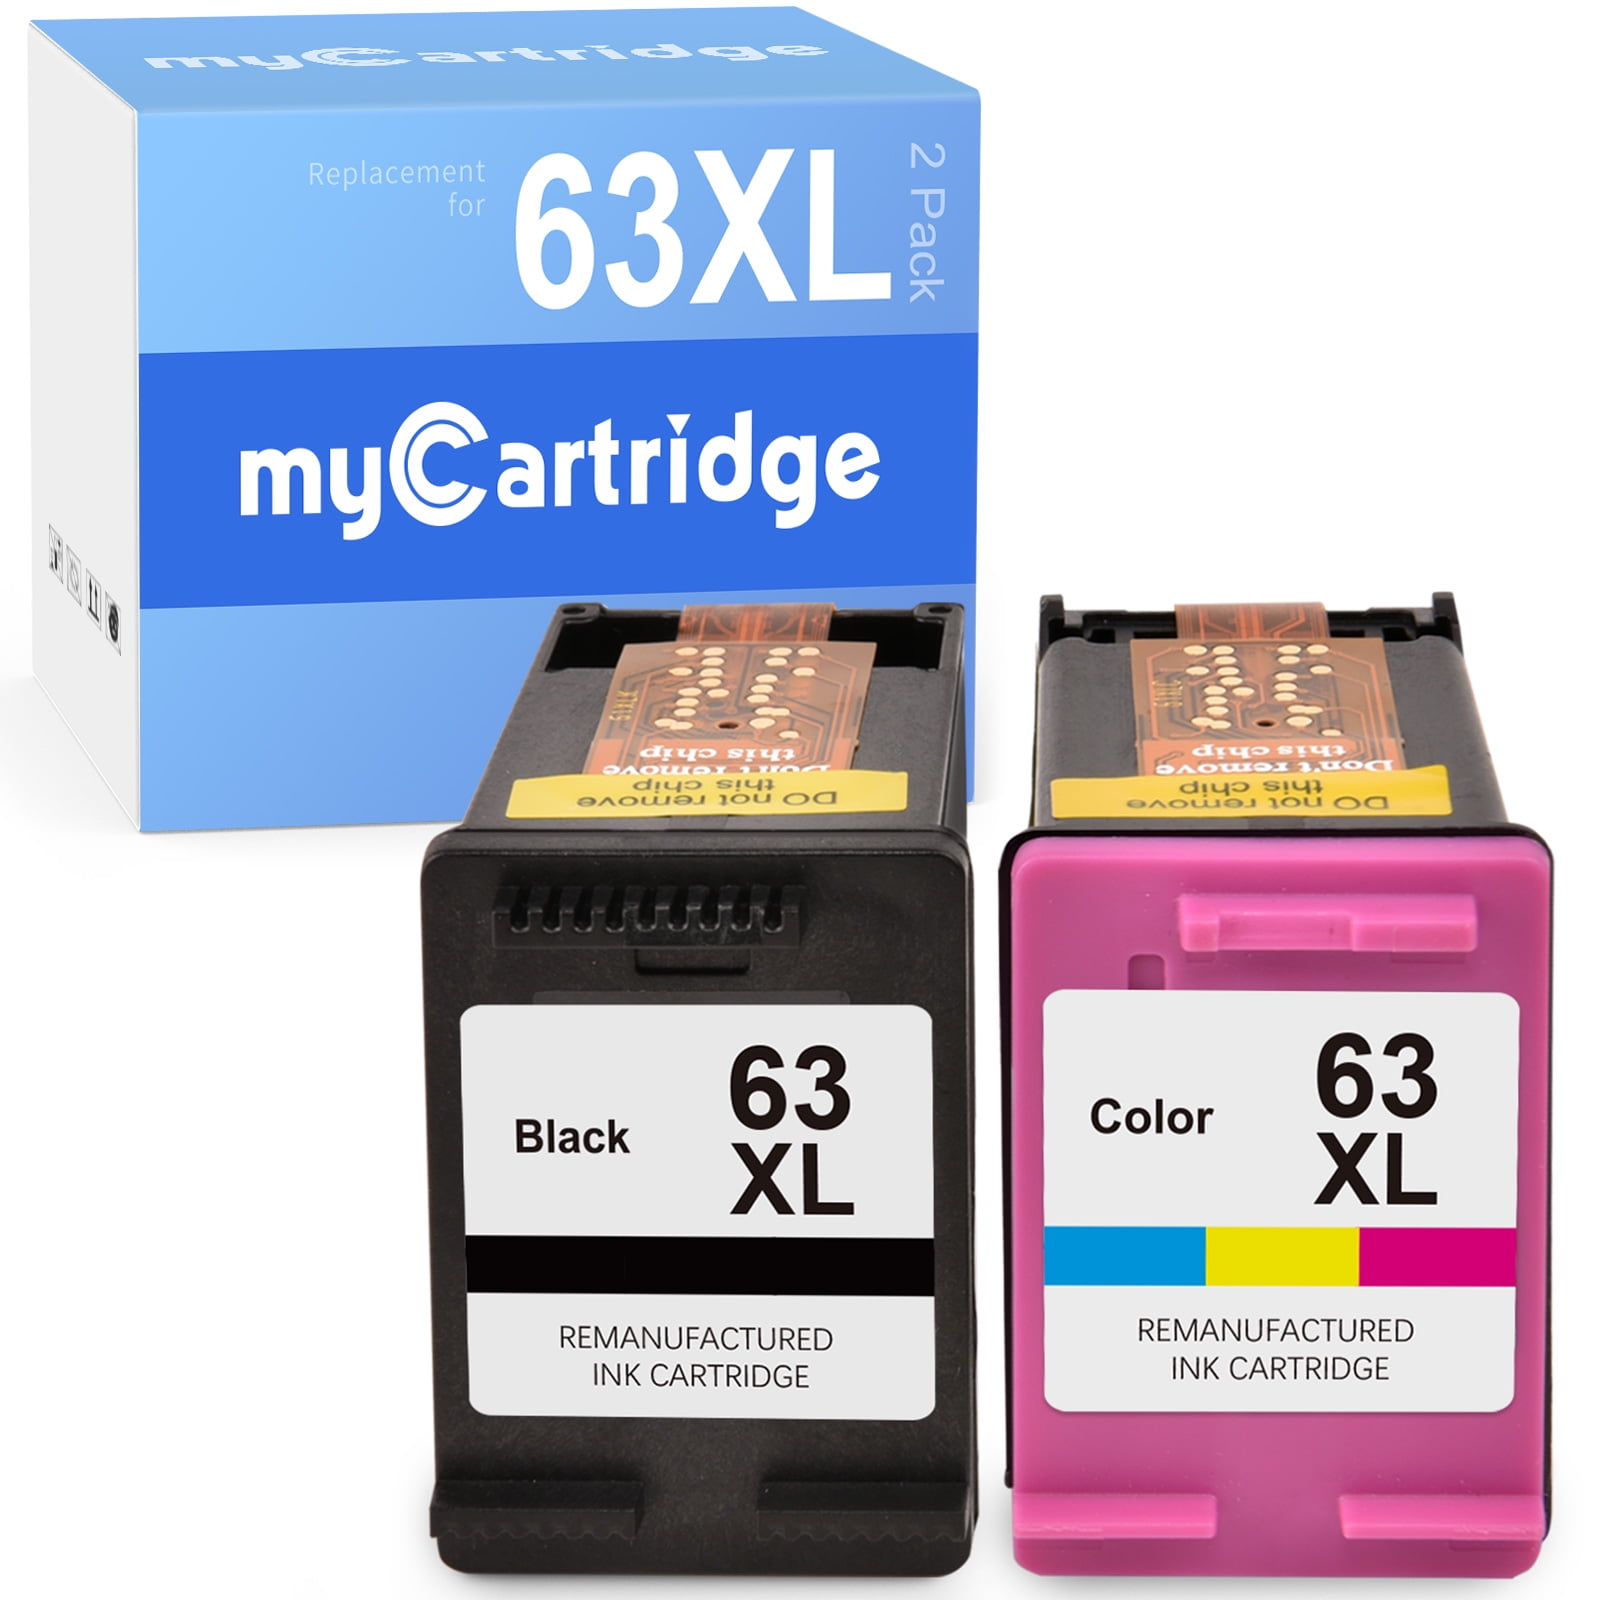 cruise toothache erosion 63XL Ink Cartridge for HP 63 XL with HP Envy 4520 4512 Deskjet 3631 3632  Officejet 3830 4650 5255 5258 4655 5252 (2 Pack) - Walmart.com